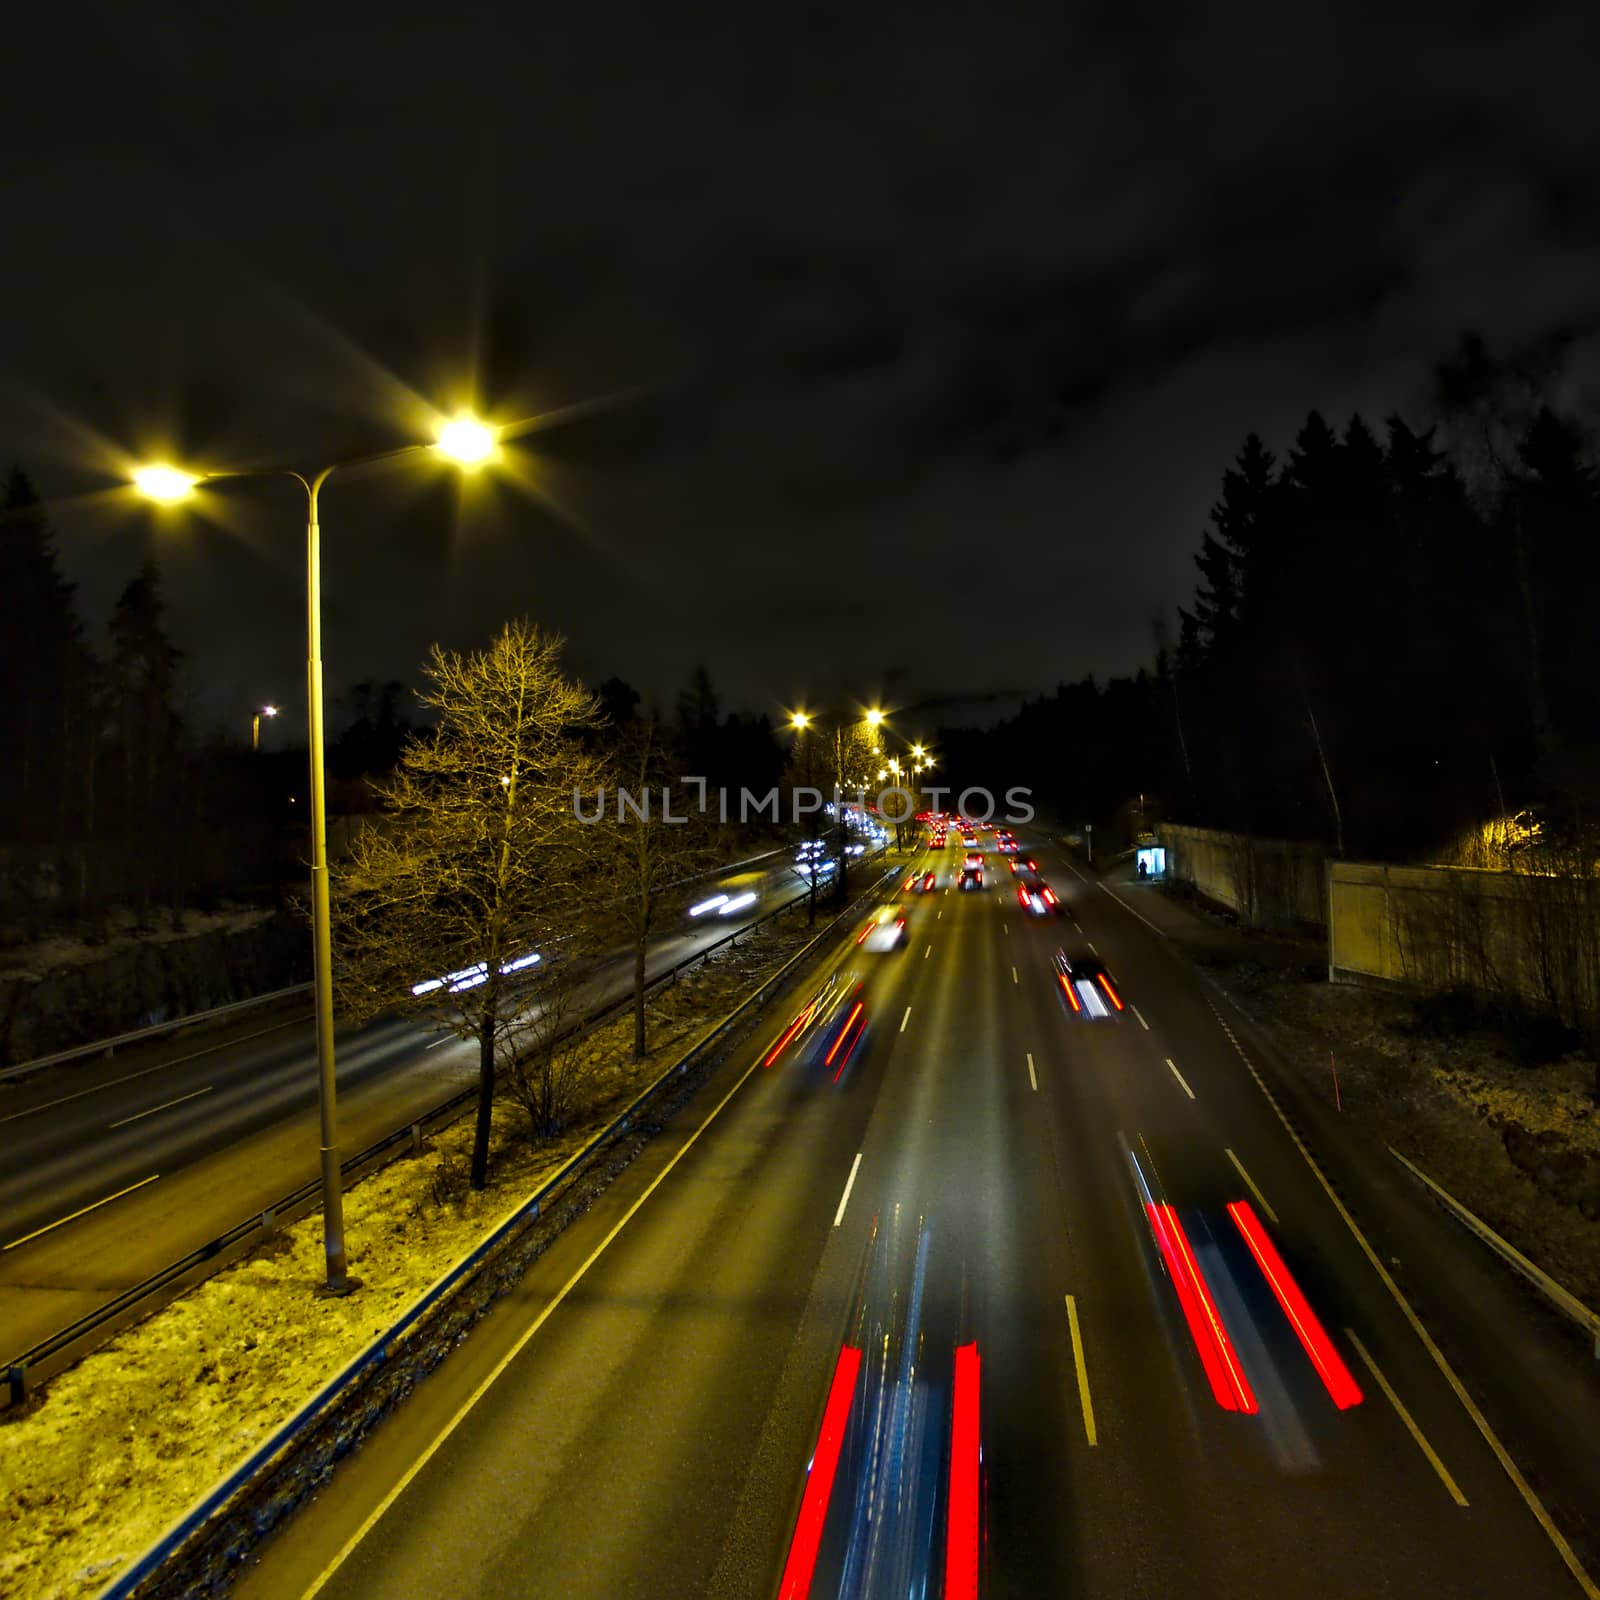 Late night rush hour. People driving home from work in the city. Light trails, long exposure.